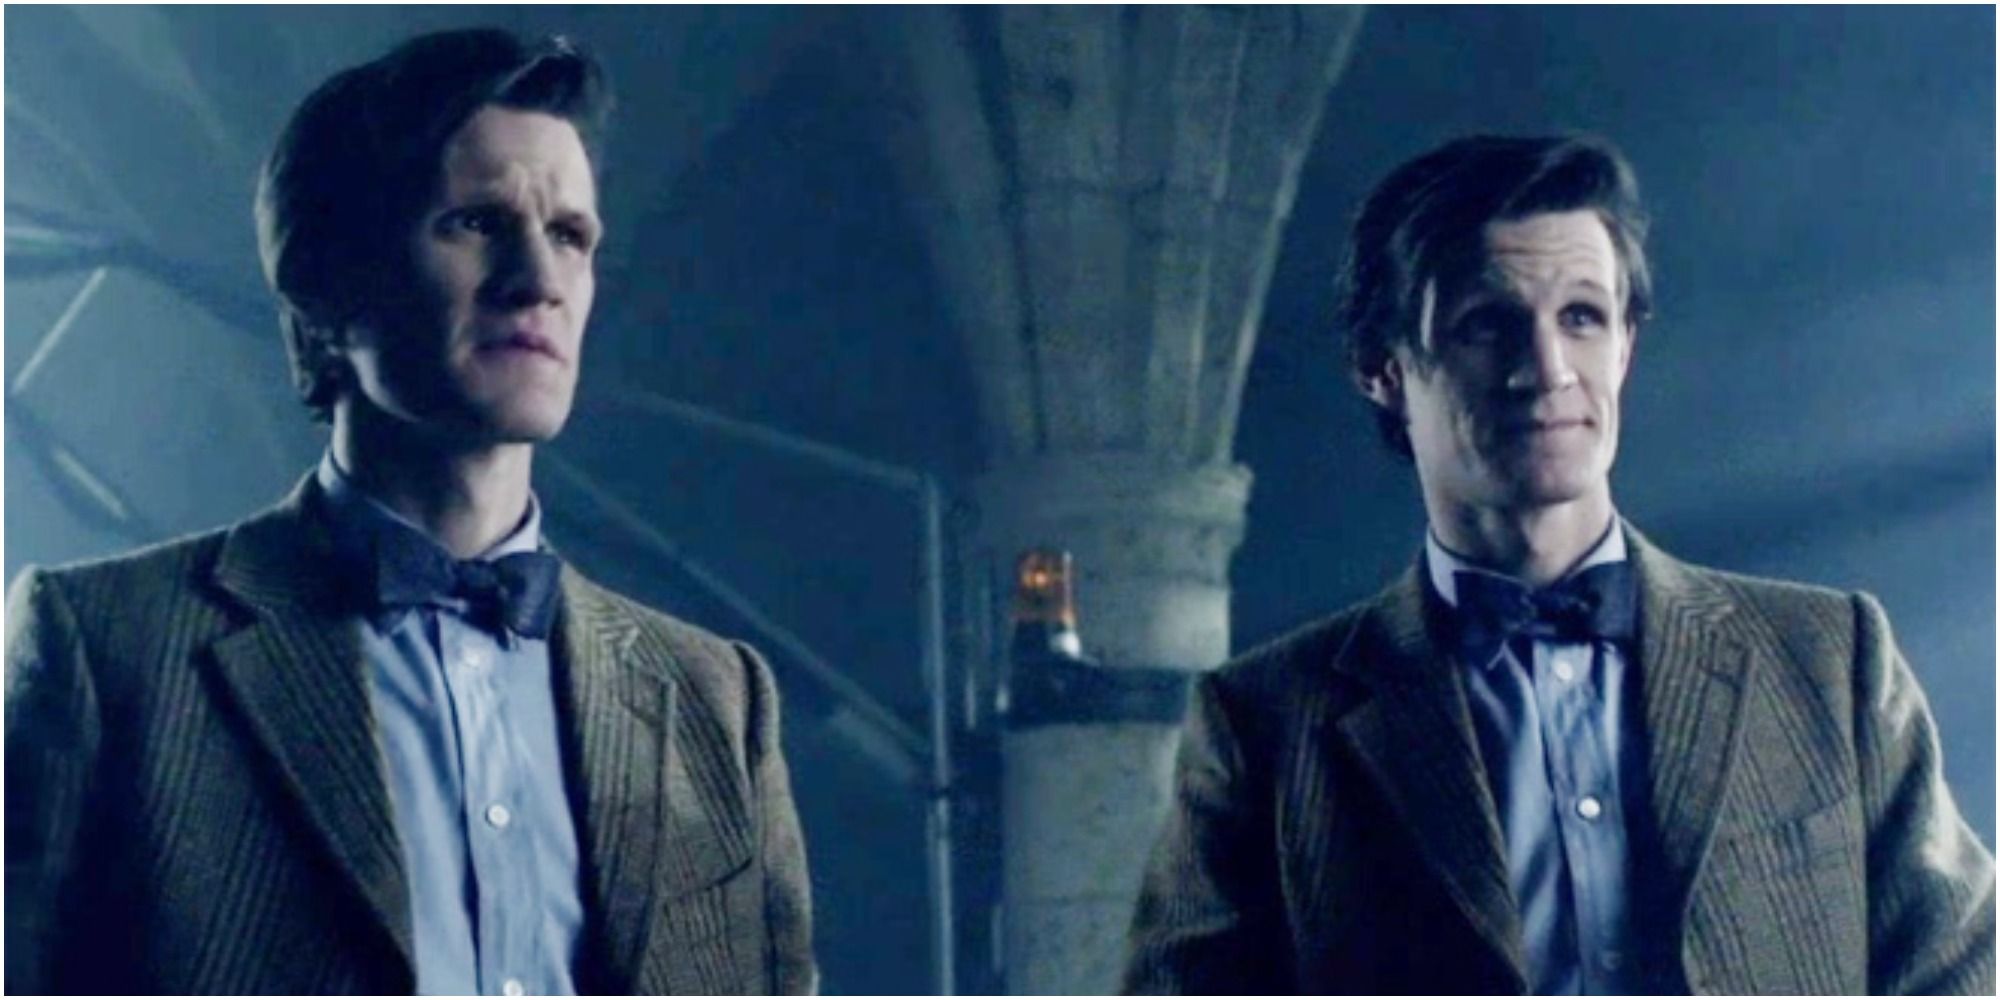 The Eleventh Doctor and his doppelganger in Doctor Who.